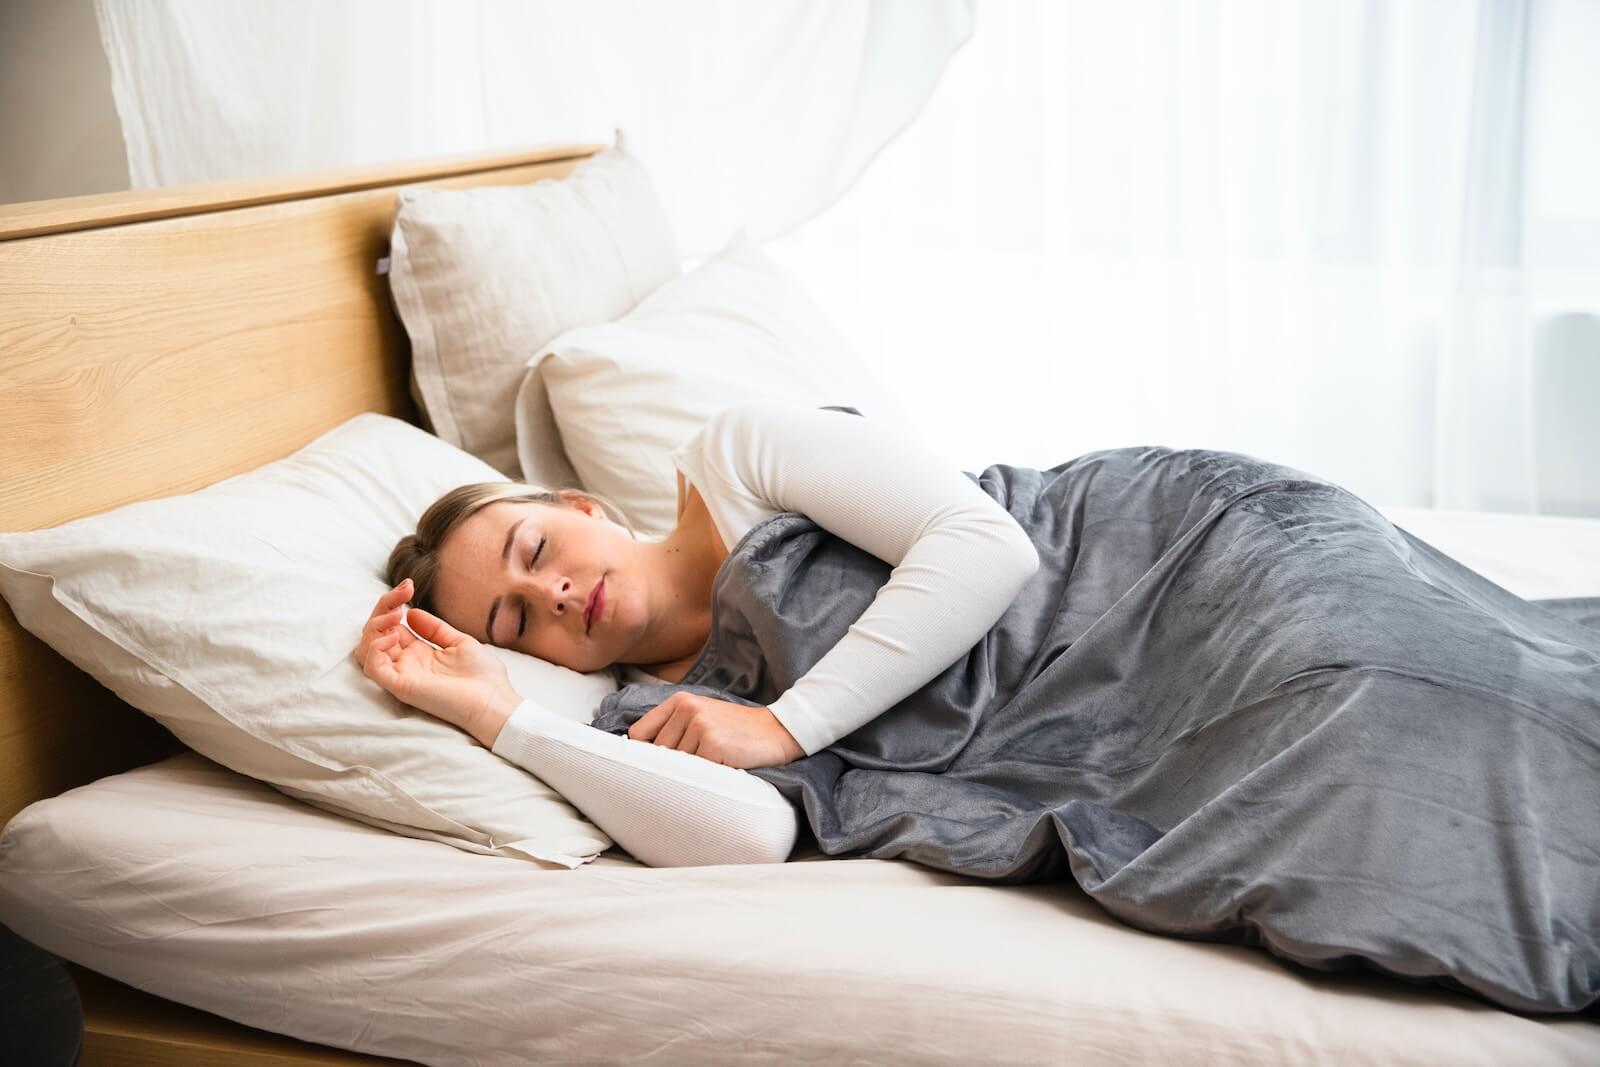 a woman sleeping on a bed with a pillow